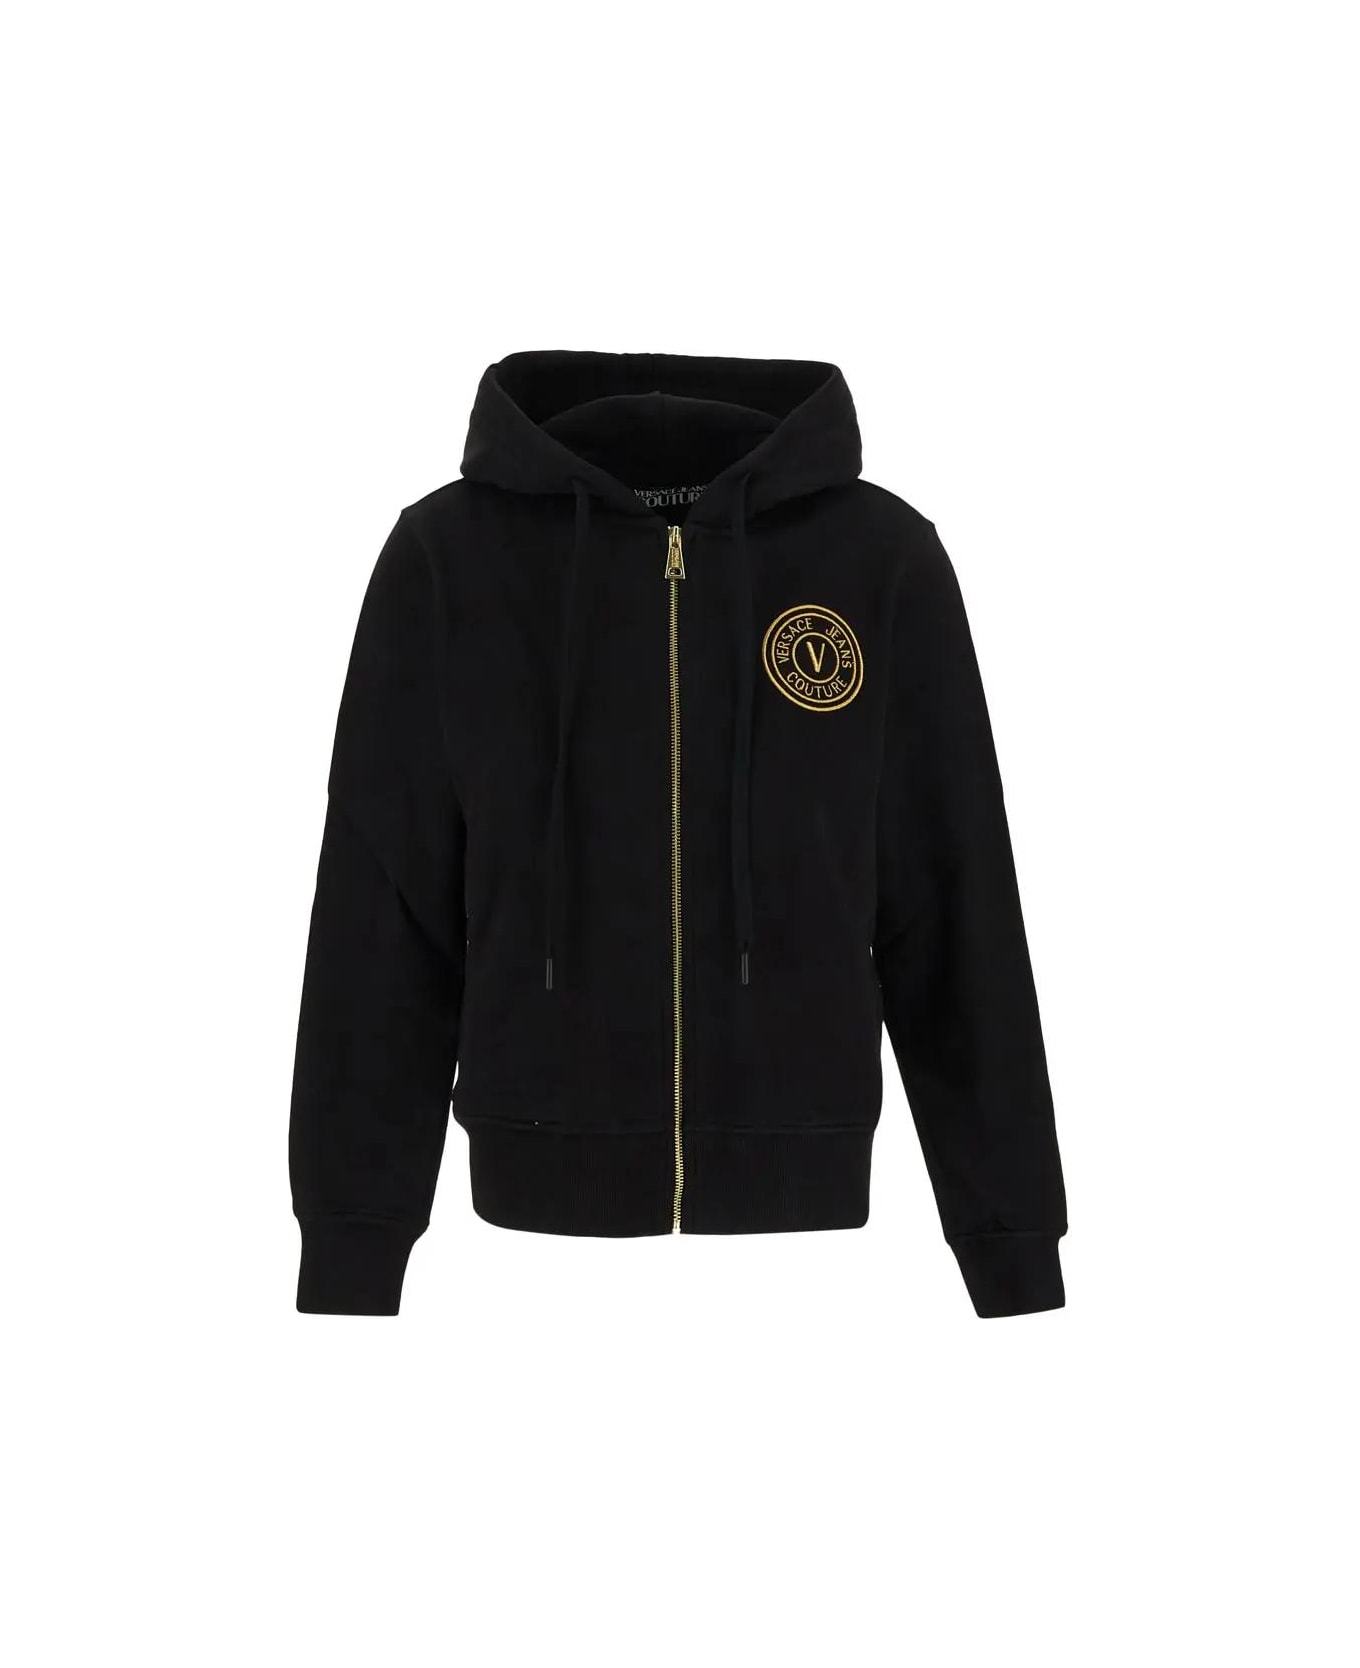 Versace Jeans Couture Logo Hoodie - Black/gold ジャケット